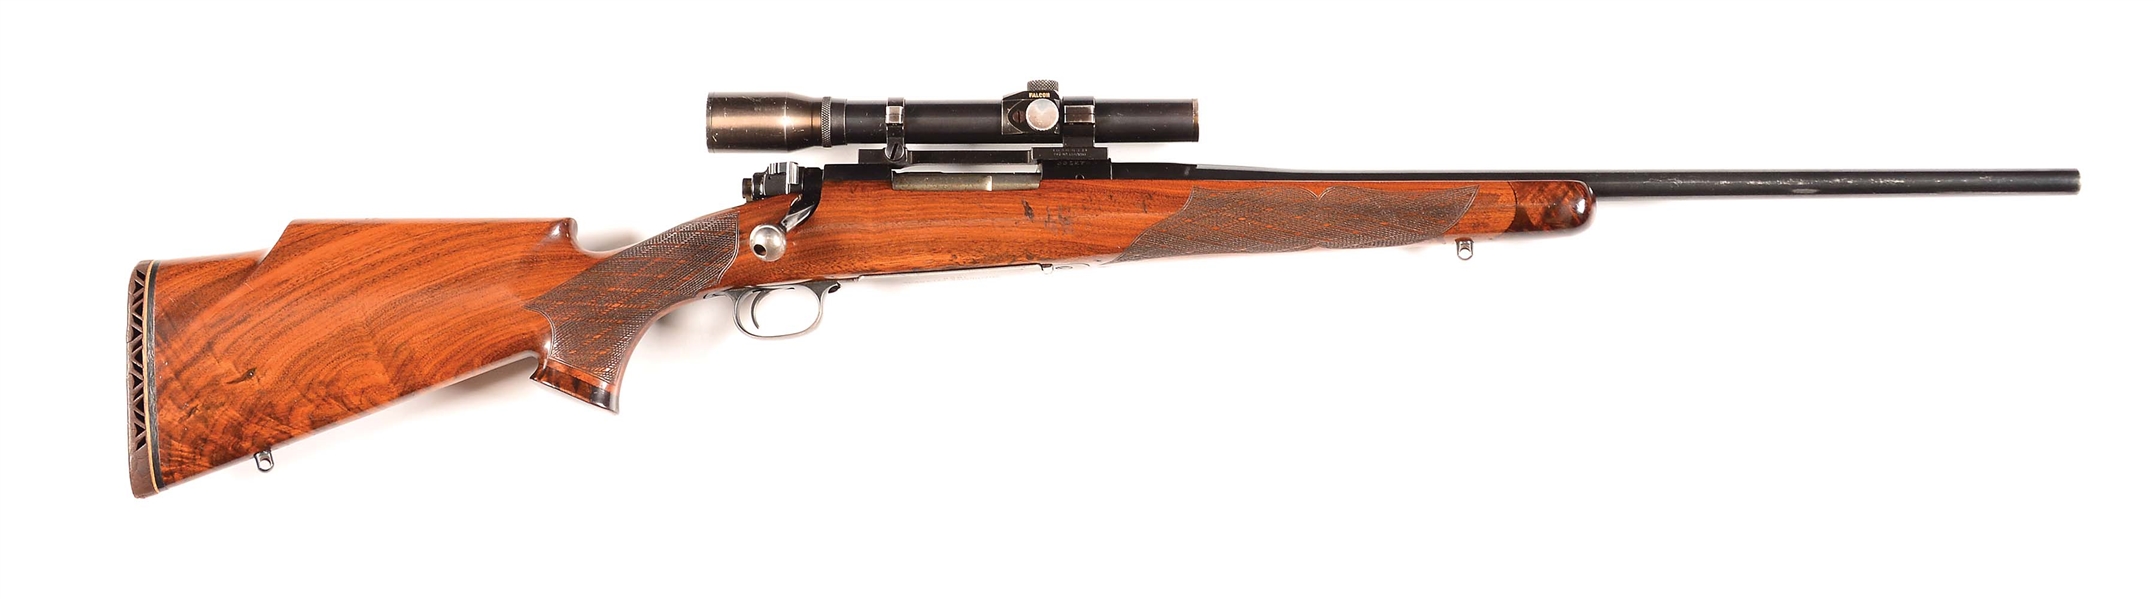 (C) CUSTOM WINCHESTER MODEL 70 WITH PROVENANCE TO WILLIAM K DUPONT.